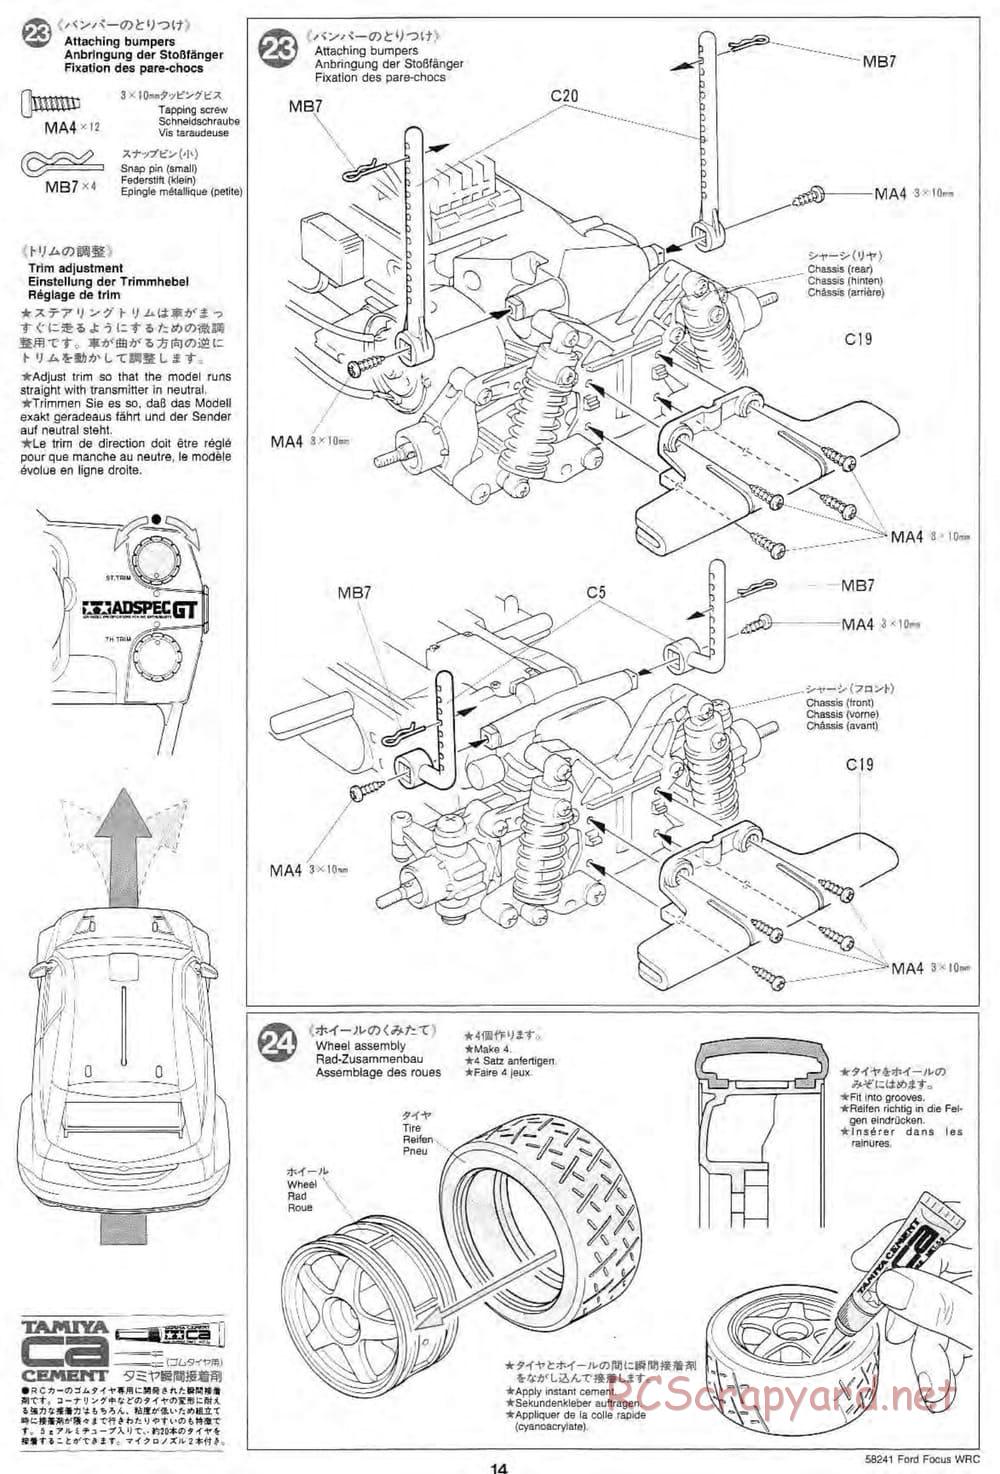 Tamiya - Ford Focus WRC - TL-01 Chassis - Manual - Page 14